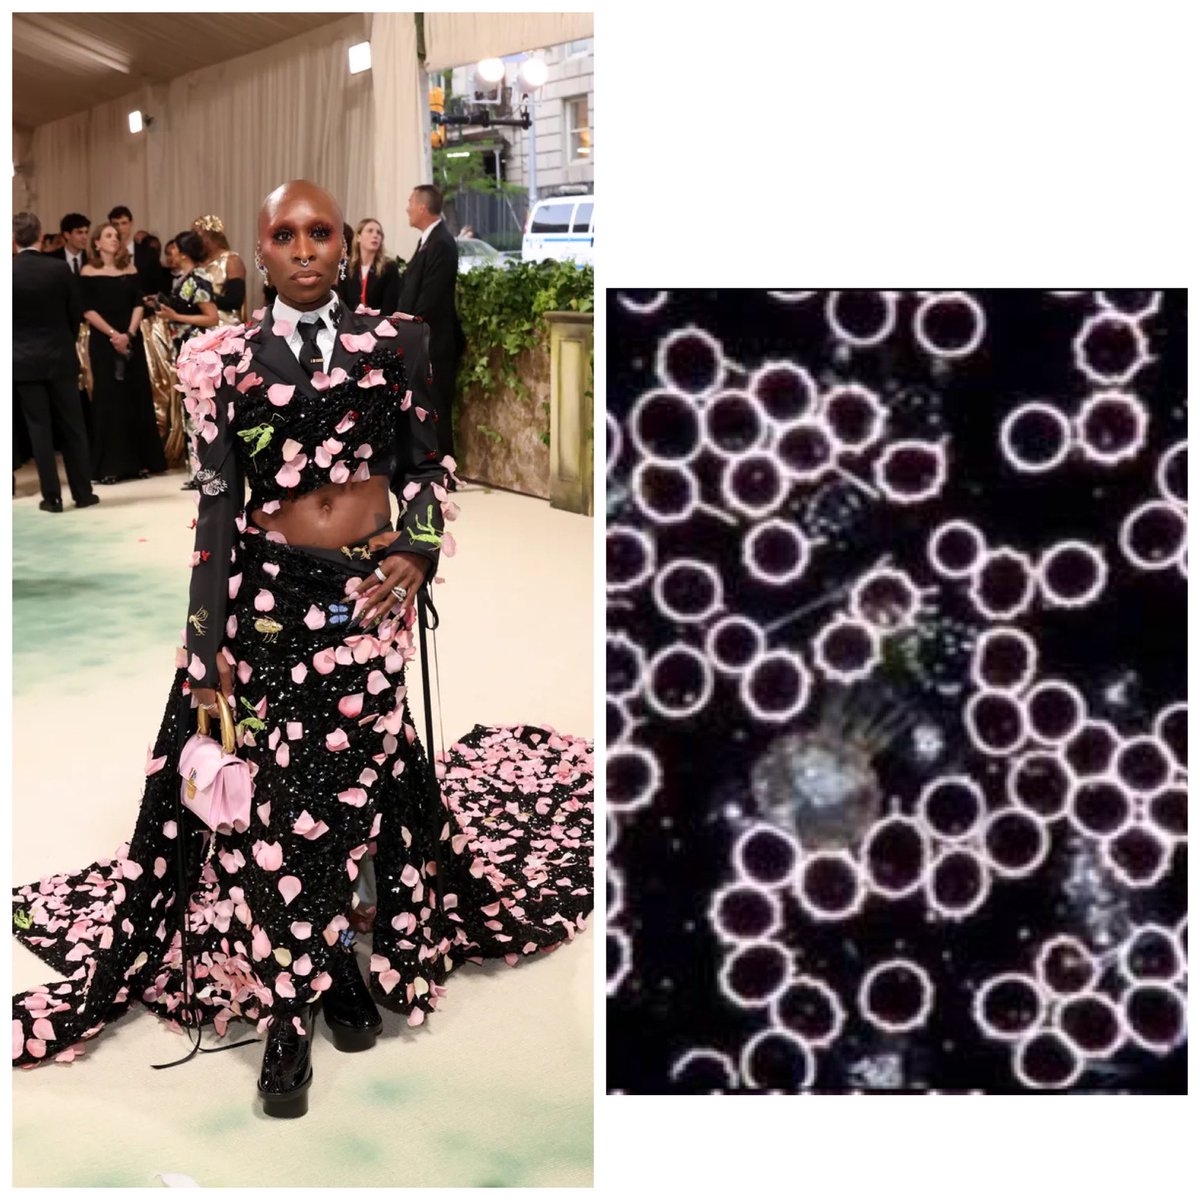 Back by popular demand! The #MetGala as things seen in science… First up, Cynthia Erivo as dark field microscopy blood cells: